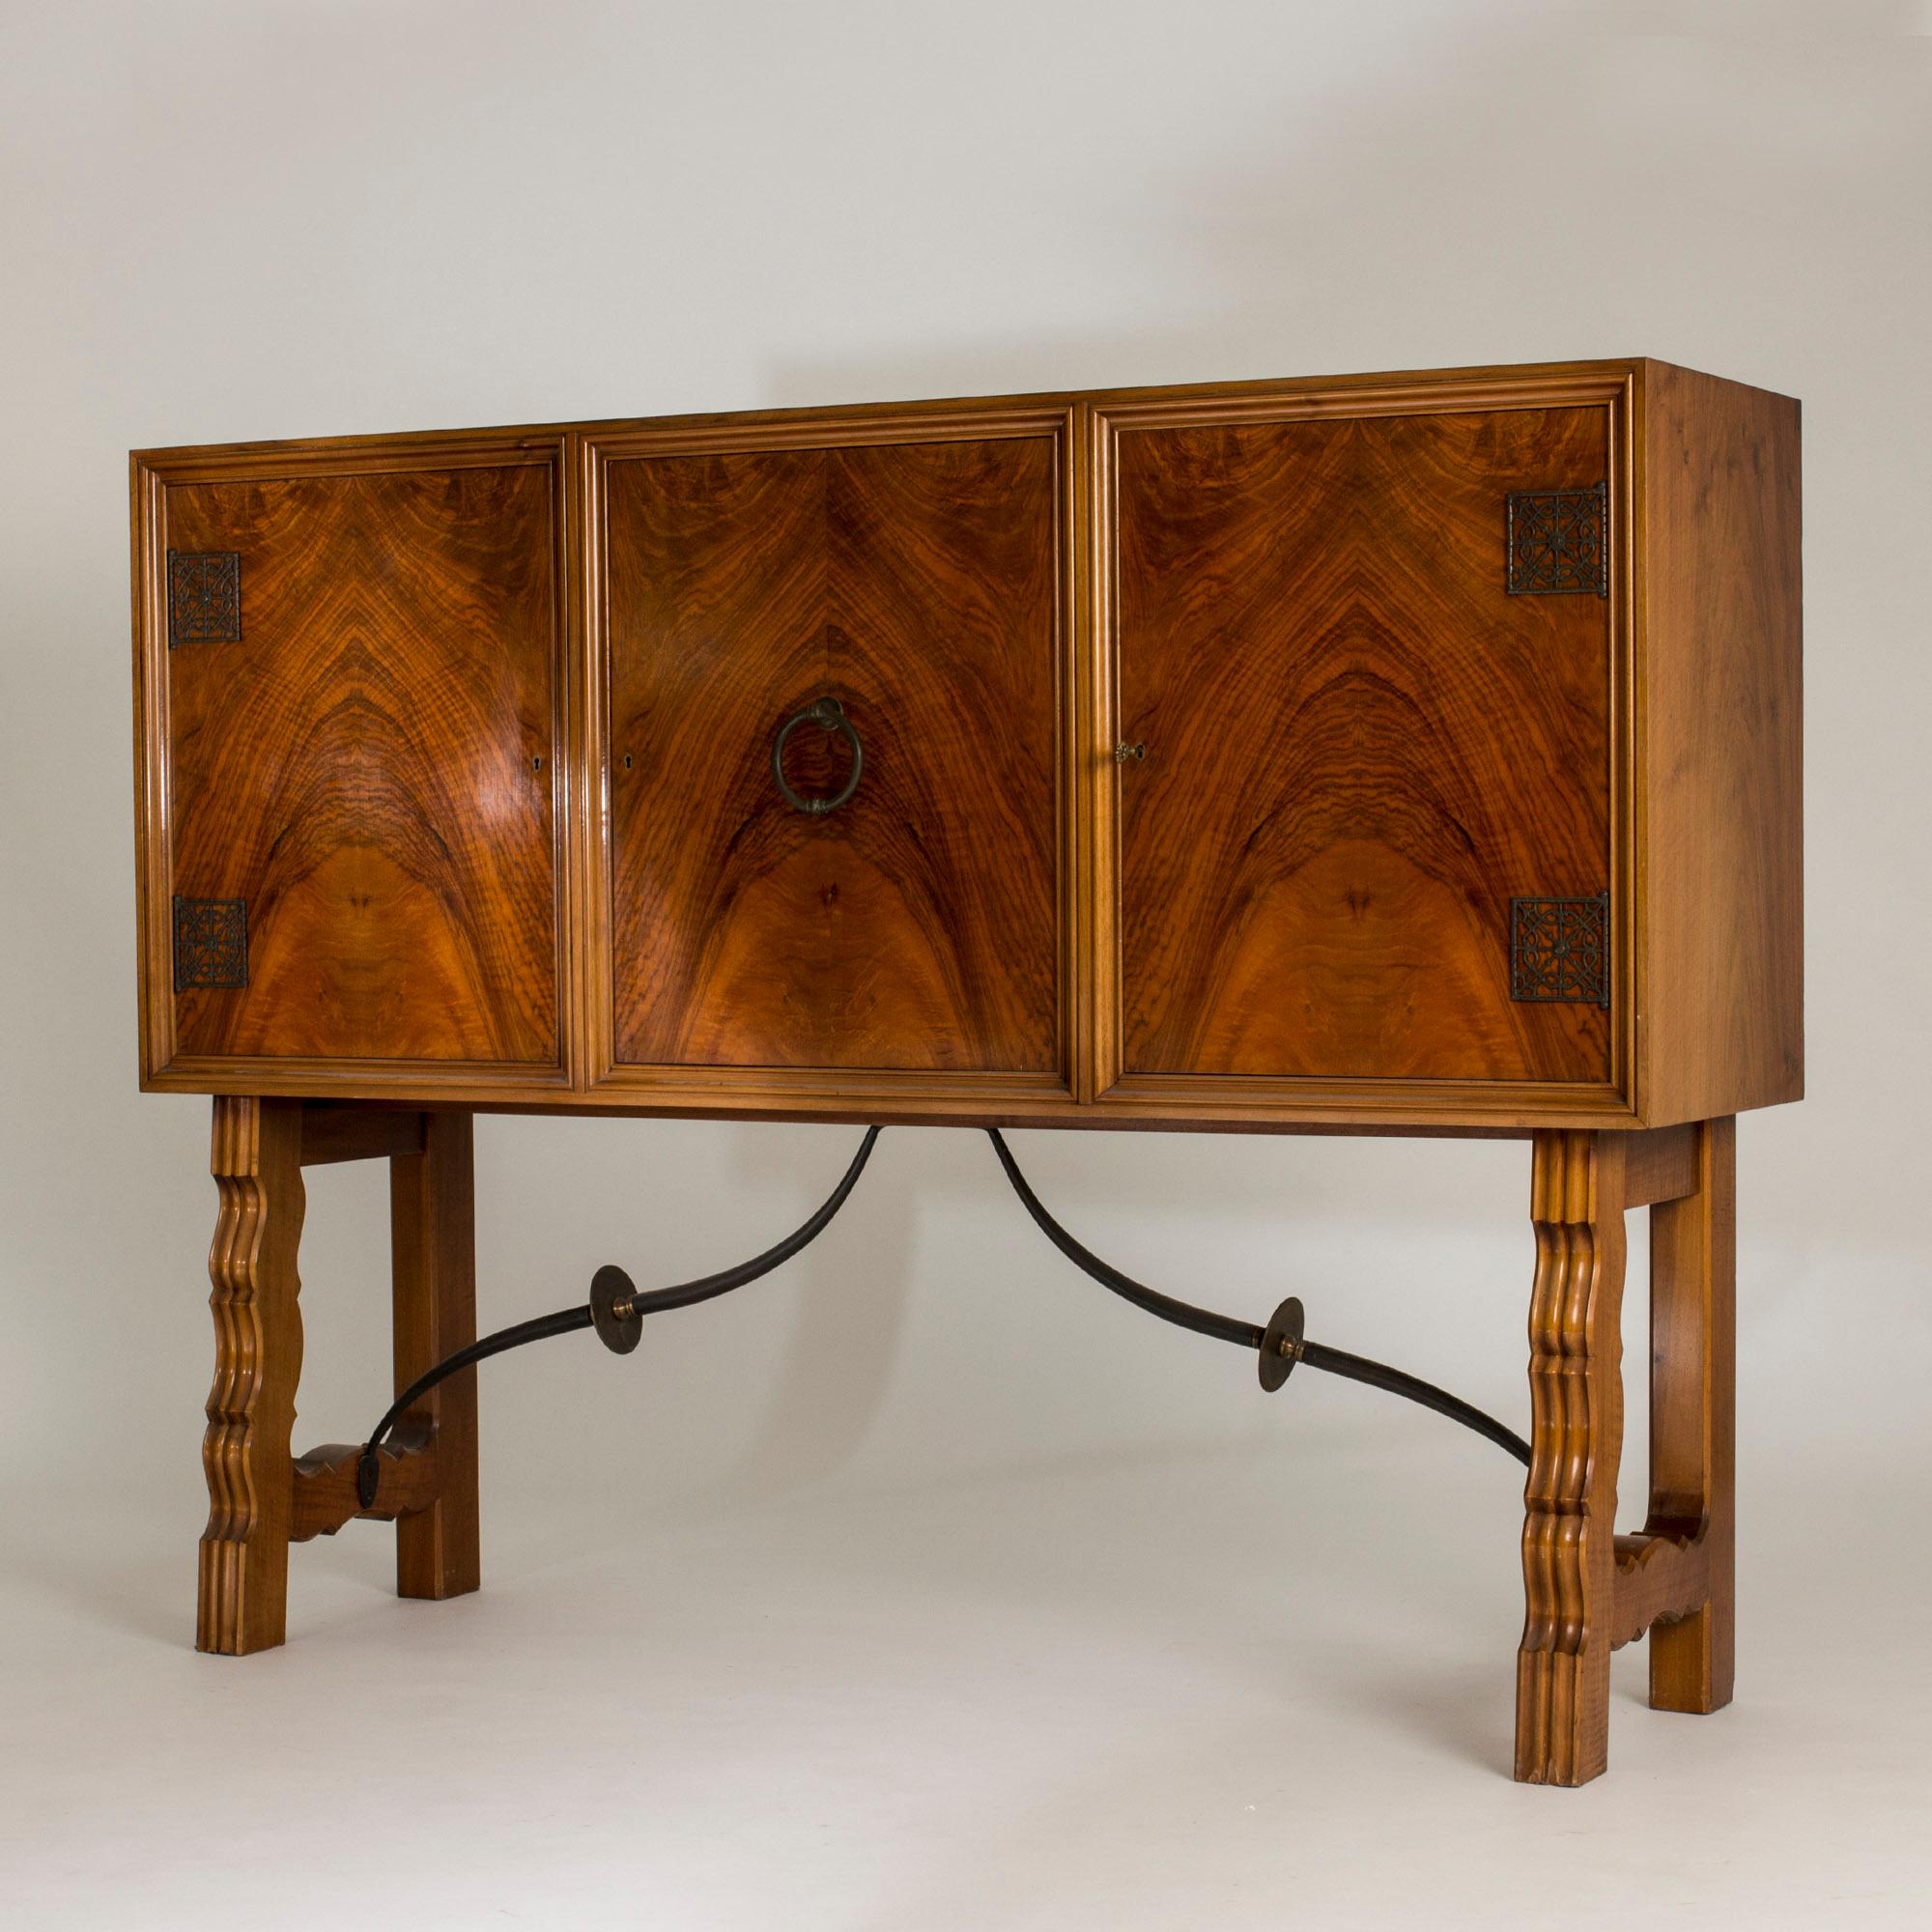 Striking, tall mahogany cabinet by Otto Schulz with dramatic veneer on the front. Baroque inspired design details with robust sculpted legs, brass decorations in the corners and a knocker in the center. Beautiful flowing metal extenders under the